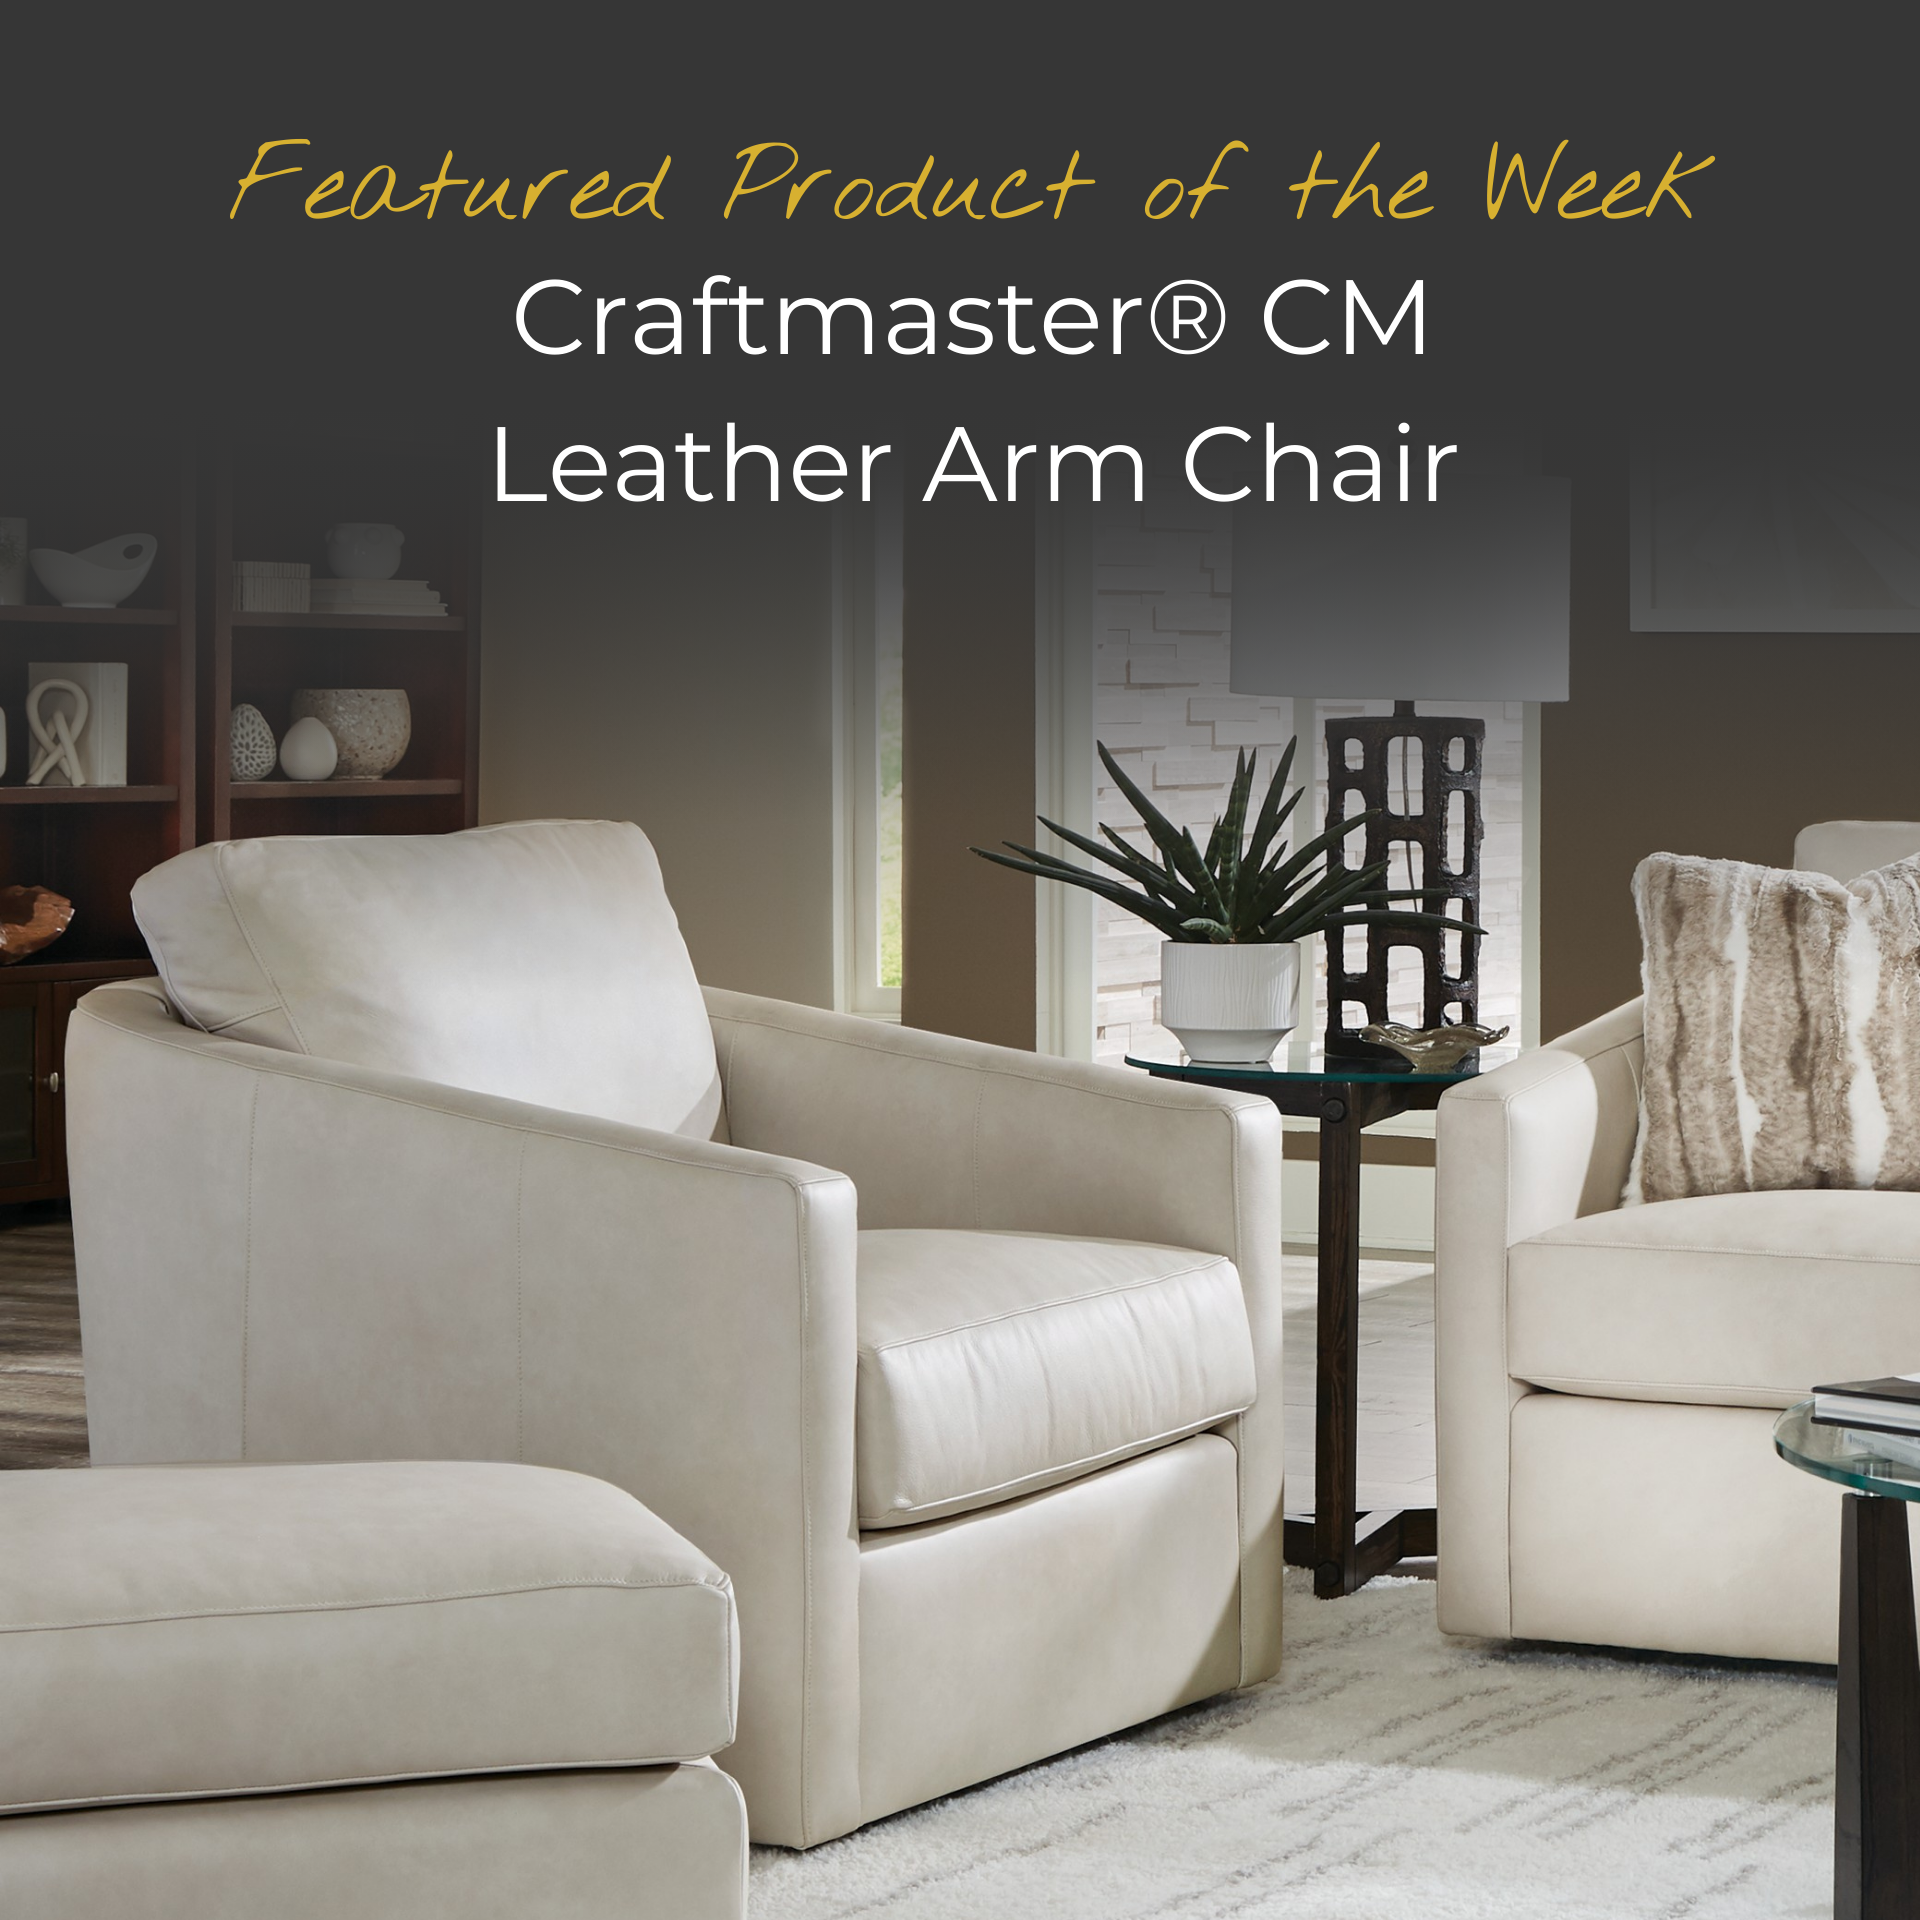 https://d12mivgeuoigbq.cloudfront.net/magento-media/members/bcol1-colders/Feature_Craftmaster_Arm_Chair.png